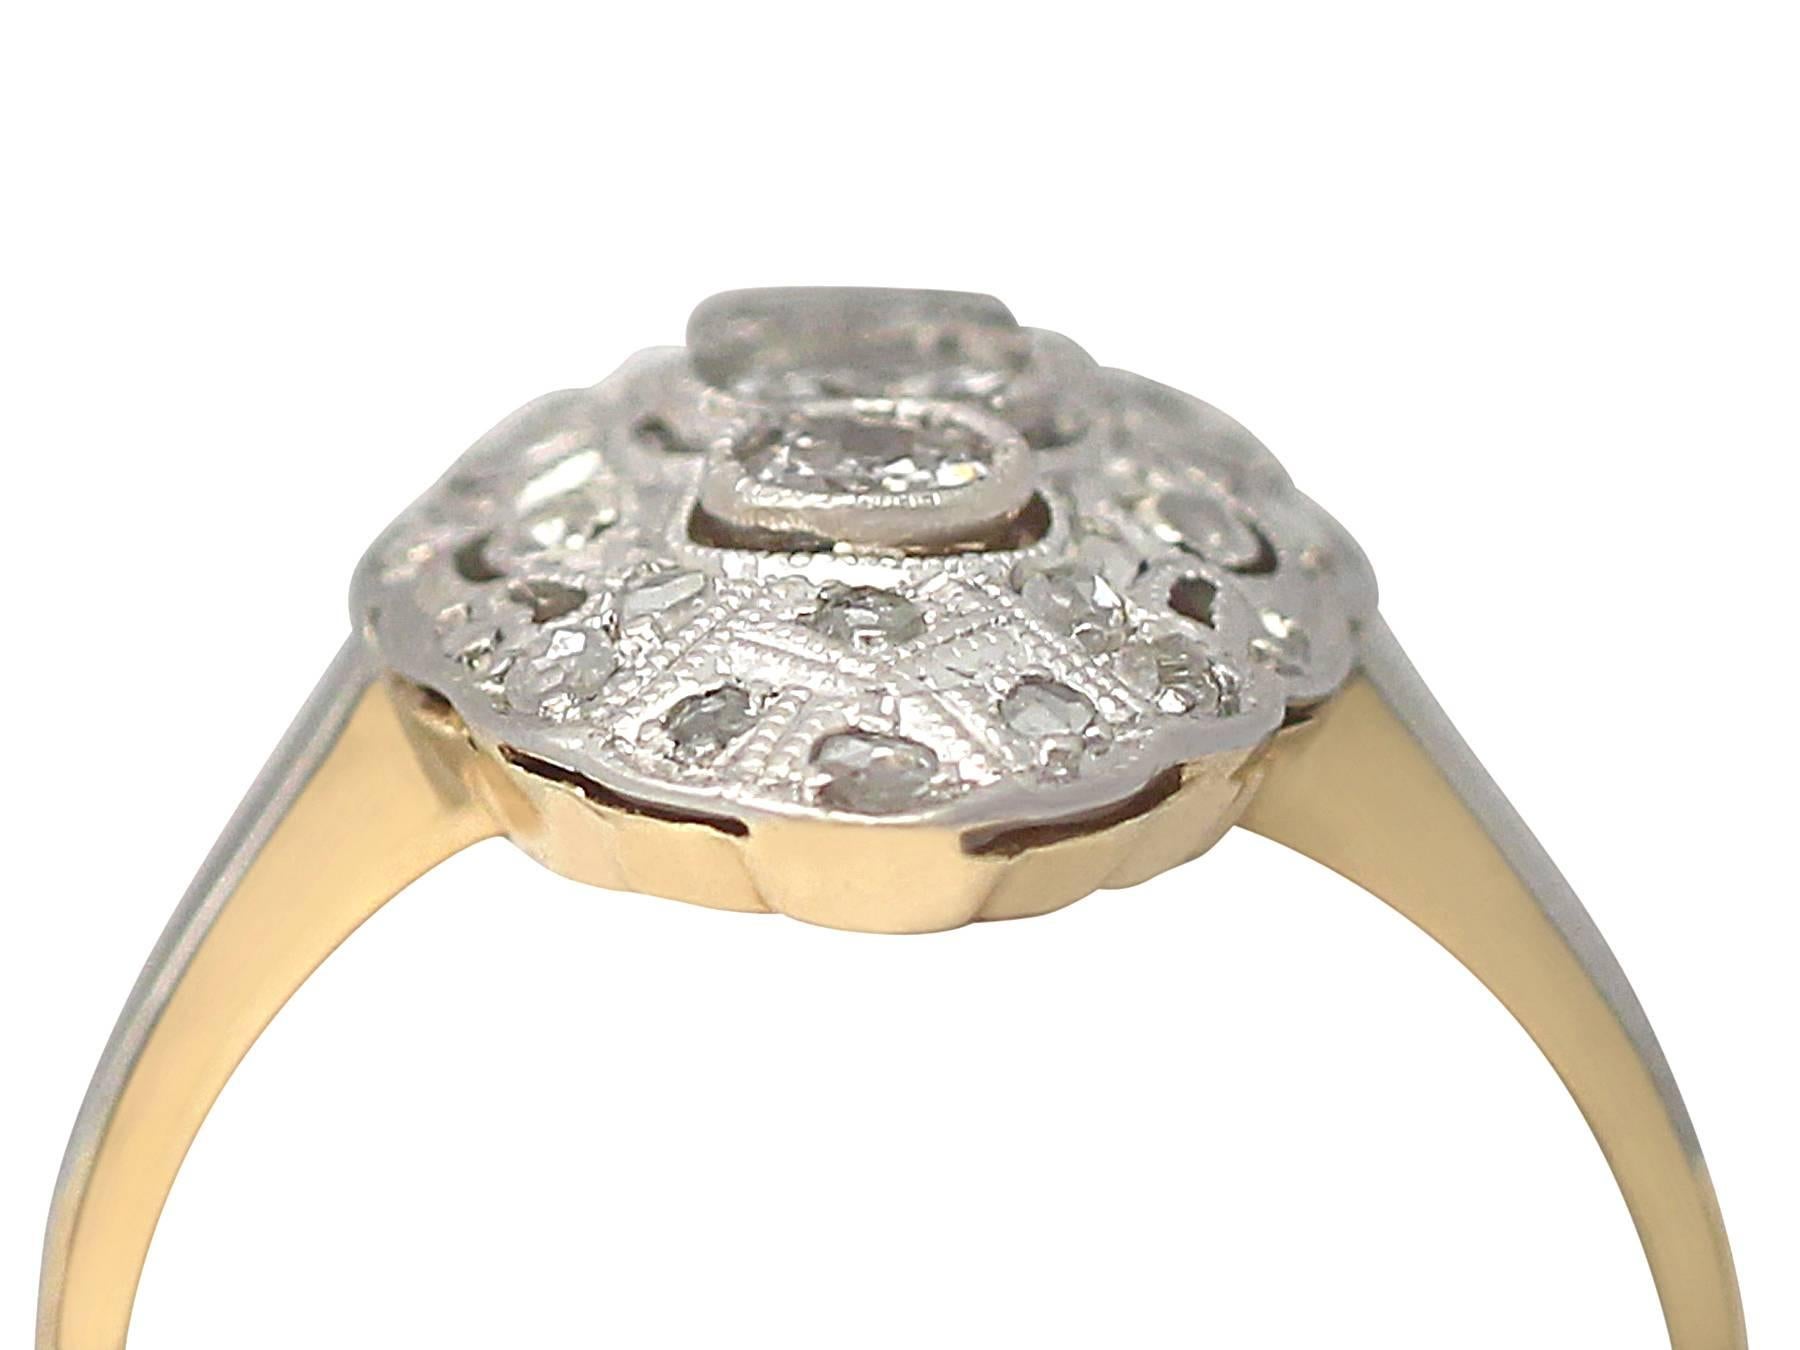 A fine and impressive antique 0.72 carat diamond and 14 karat yellow gold, 14 karat white gold set marquise shaped dress ring; part of our diverse collection of antique diamond rings

This fine and impressive antique diamond ring has been crafted in